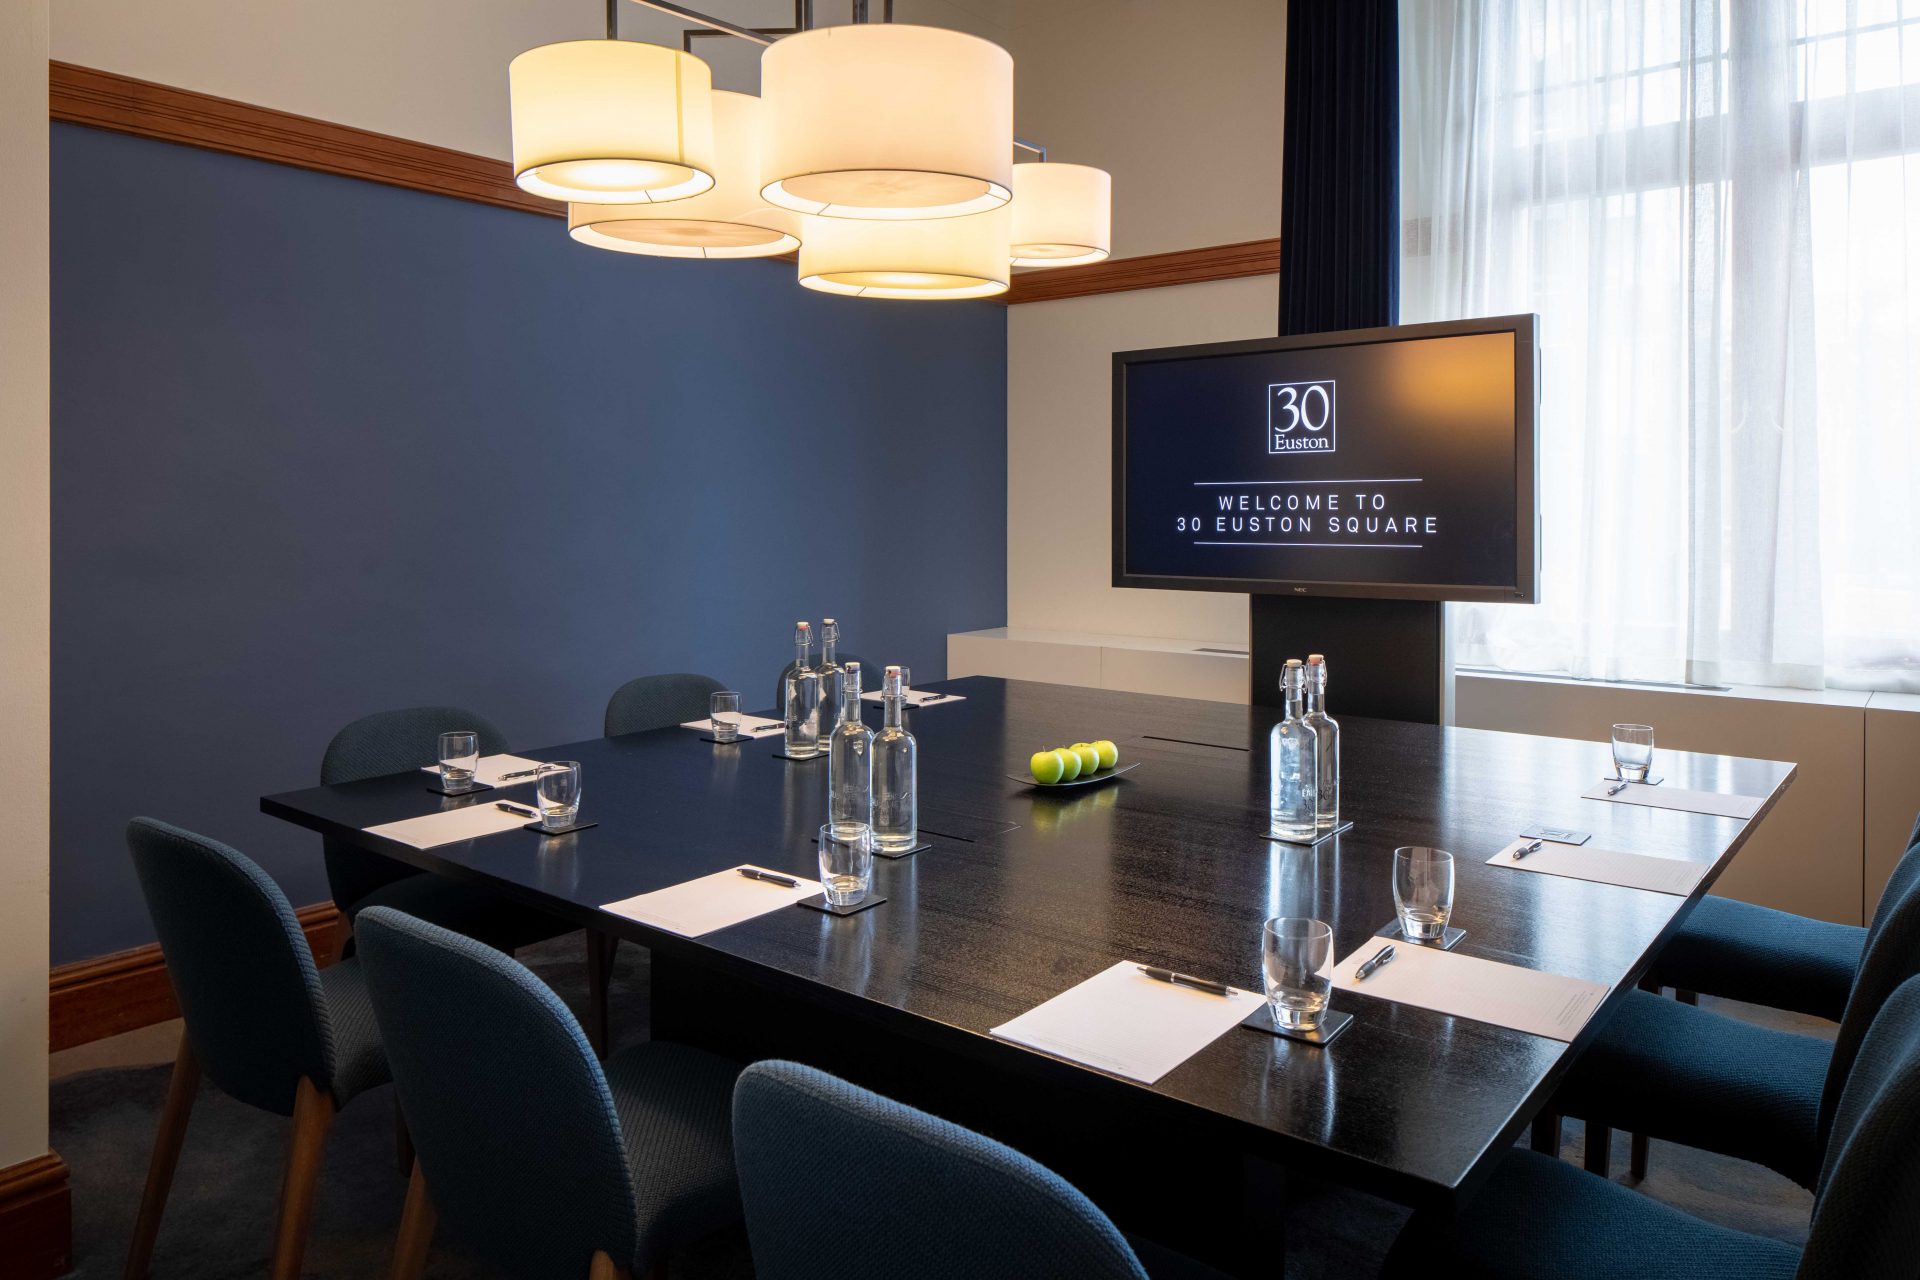 30 euston square conference room with navy wall and seats